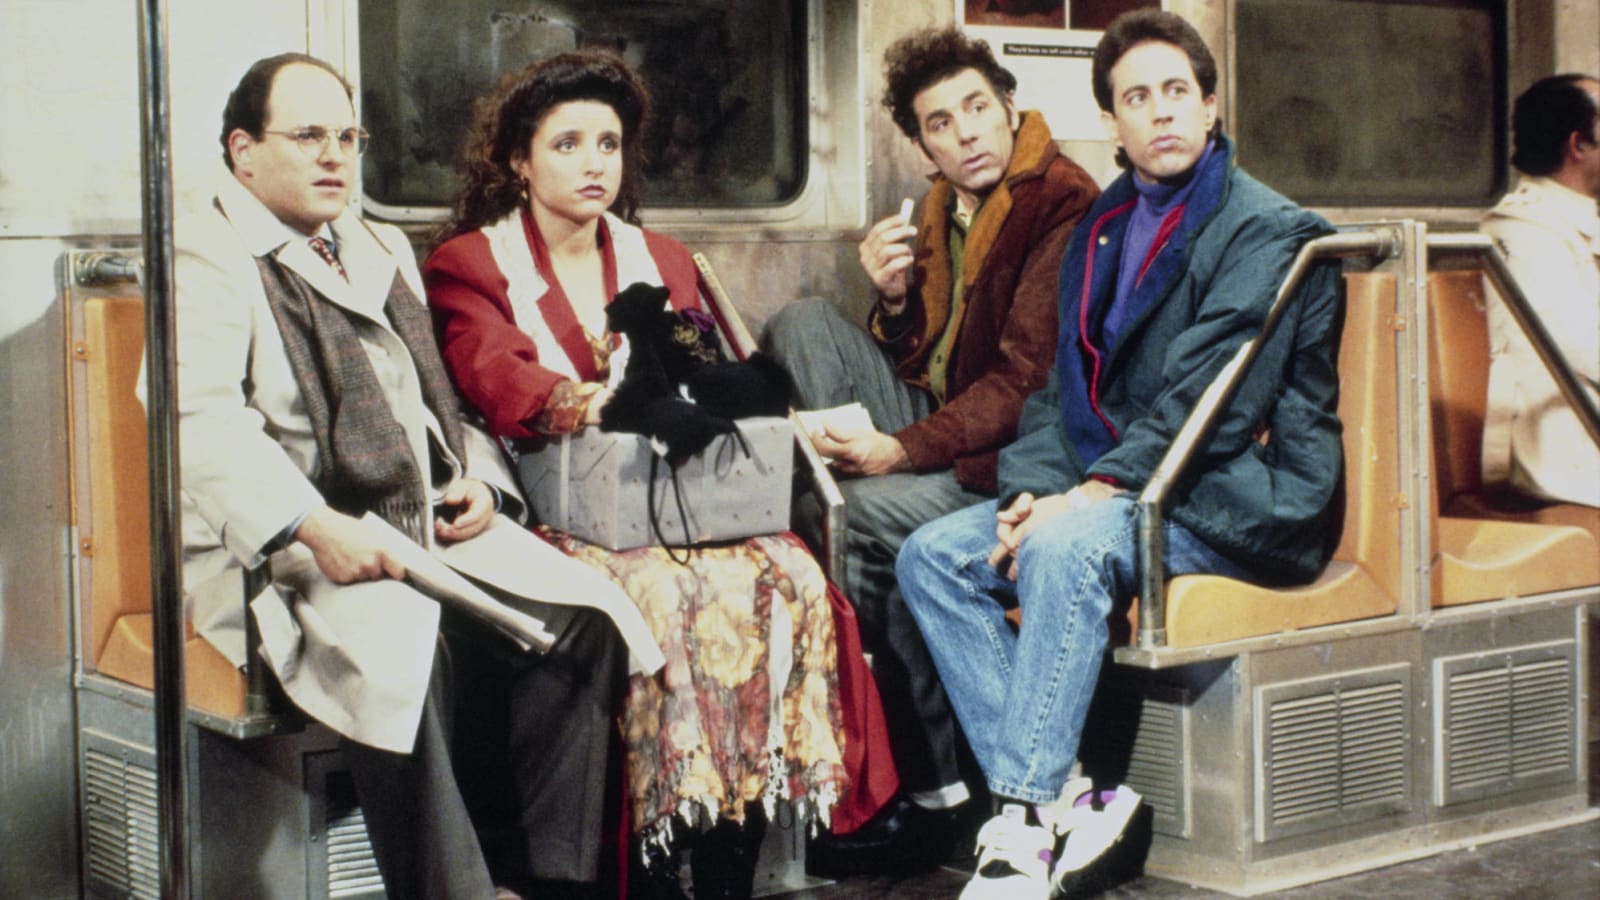 The best fake films from "Seinfeld"